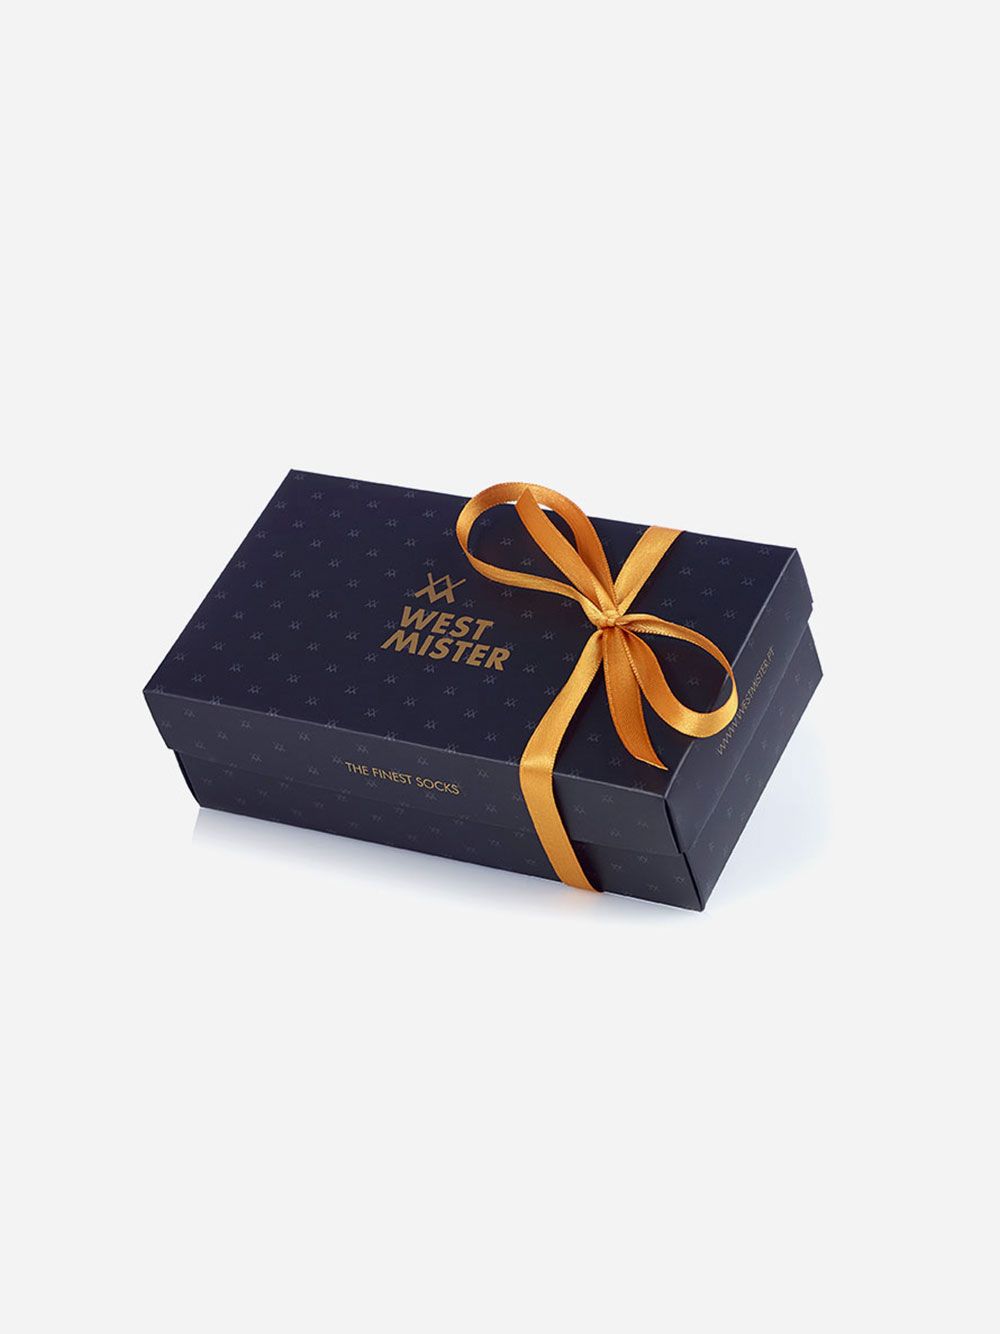 Striped Gift Box | Westmister